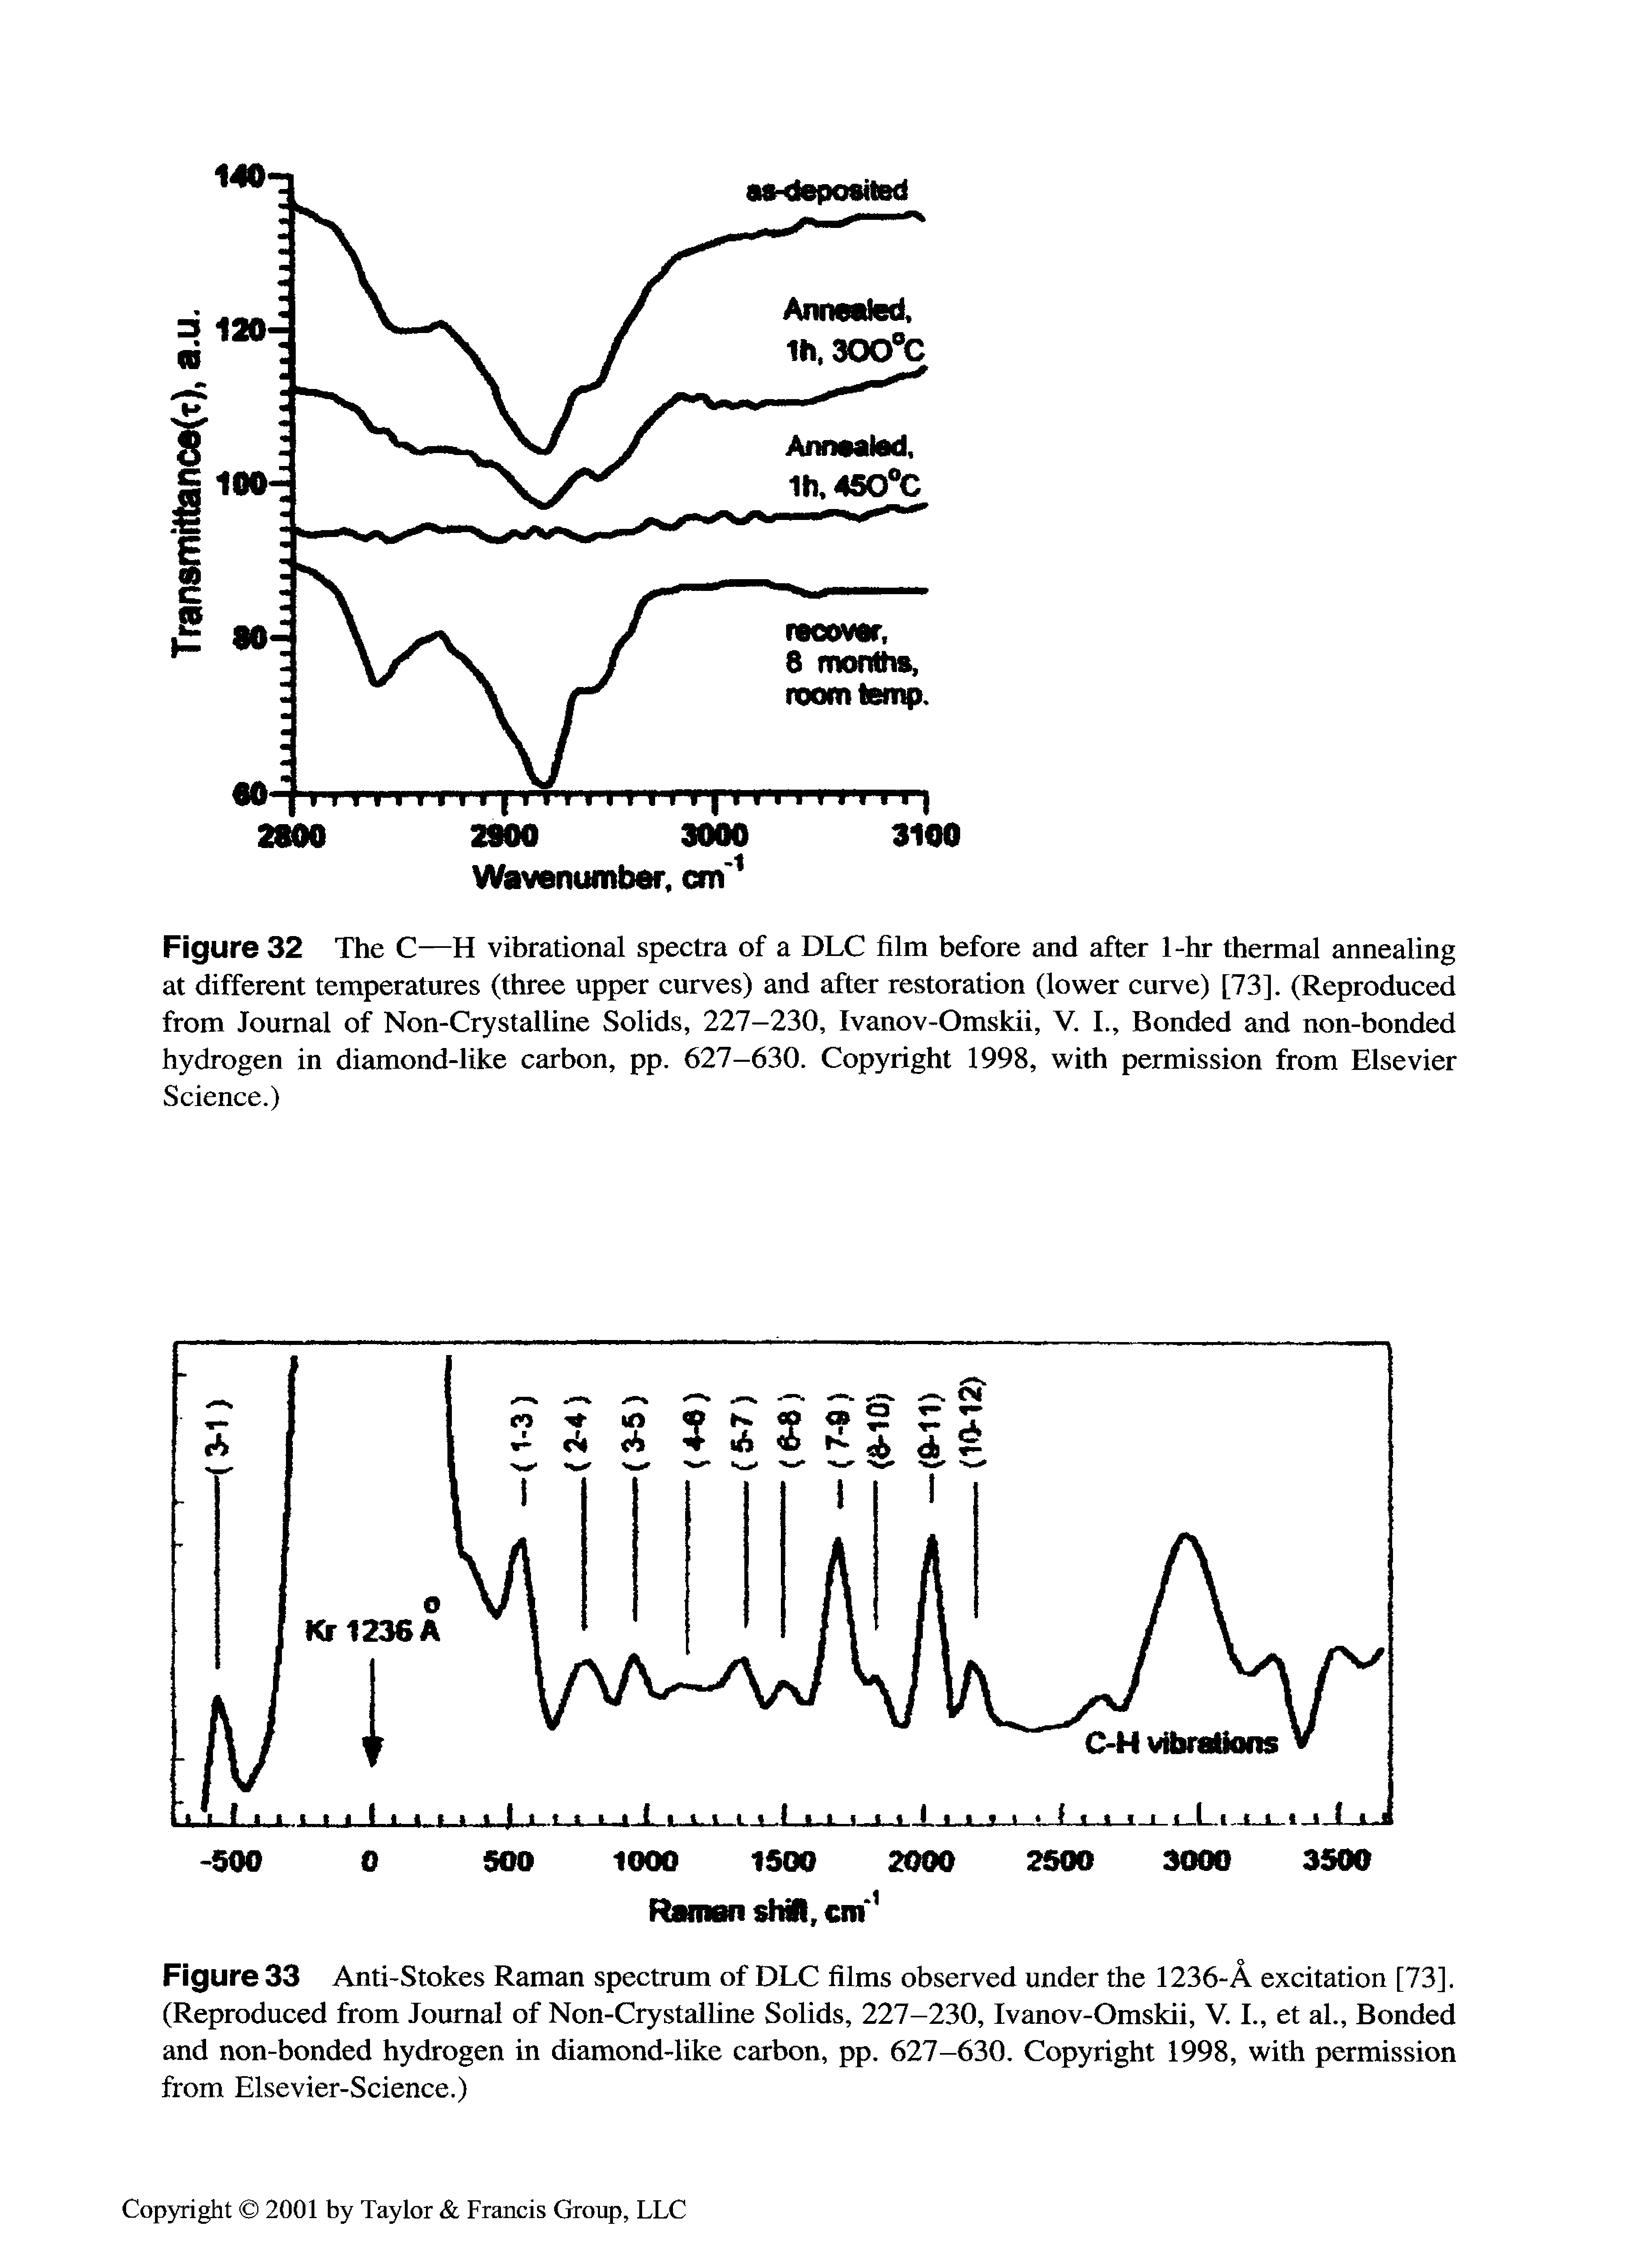 Figure 33 Anti-Stokes Raman spectrum of DLC films observed under the 1236-A excitation [73]. (Reproduced from Journal of Non-Crystalline Solids, 227-230, Ivanov-Omskii, V. I., et al.. Bonded and non-bonded hydrogen in diamond-like carbon, pp. 627-630. Copyright 1998, with permission from Elsevier-Science.)...